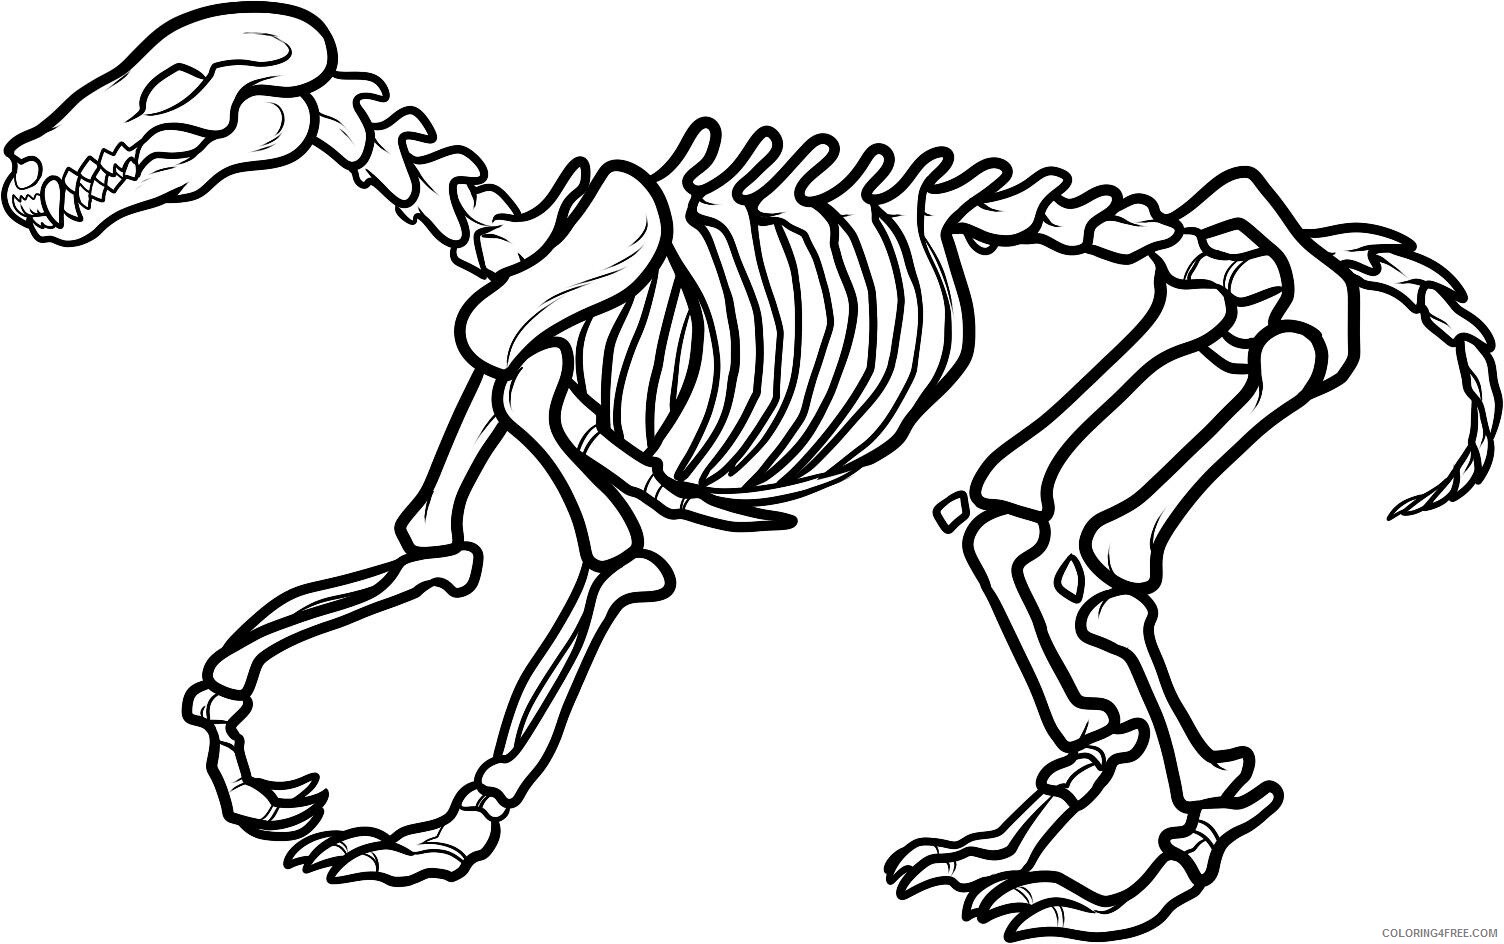 Dinosaurs Coloring Pages for boys Dinosaur Skeleton Printable 2020 0301 Coloring4free